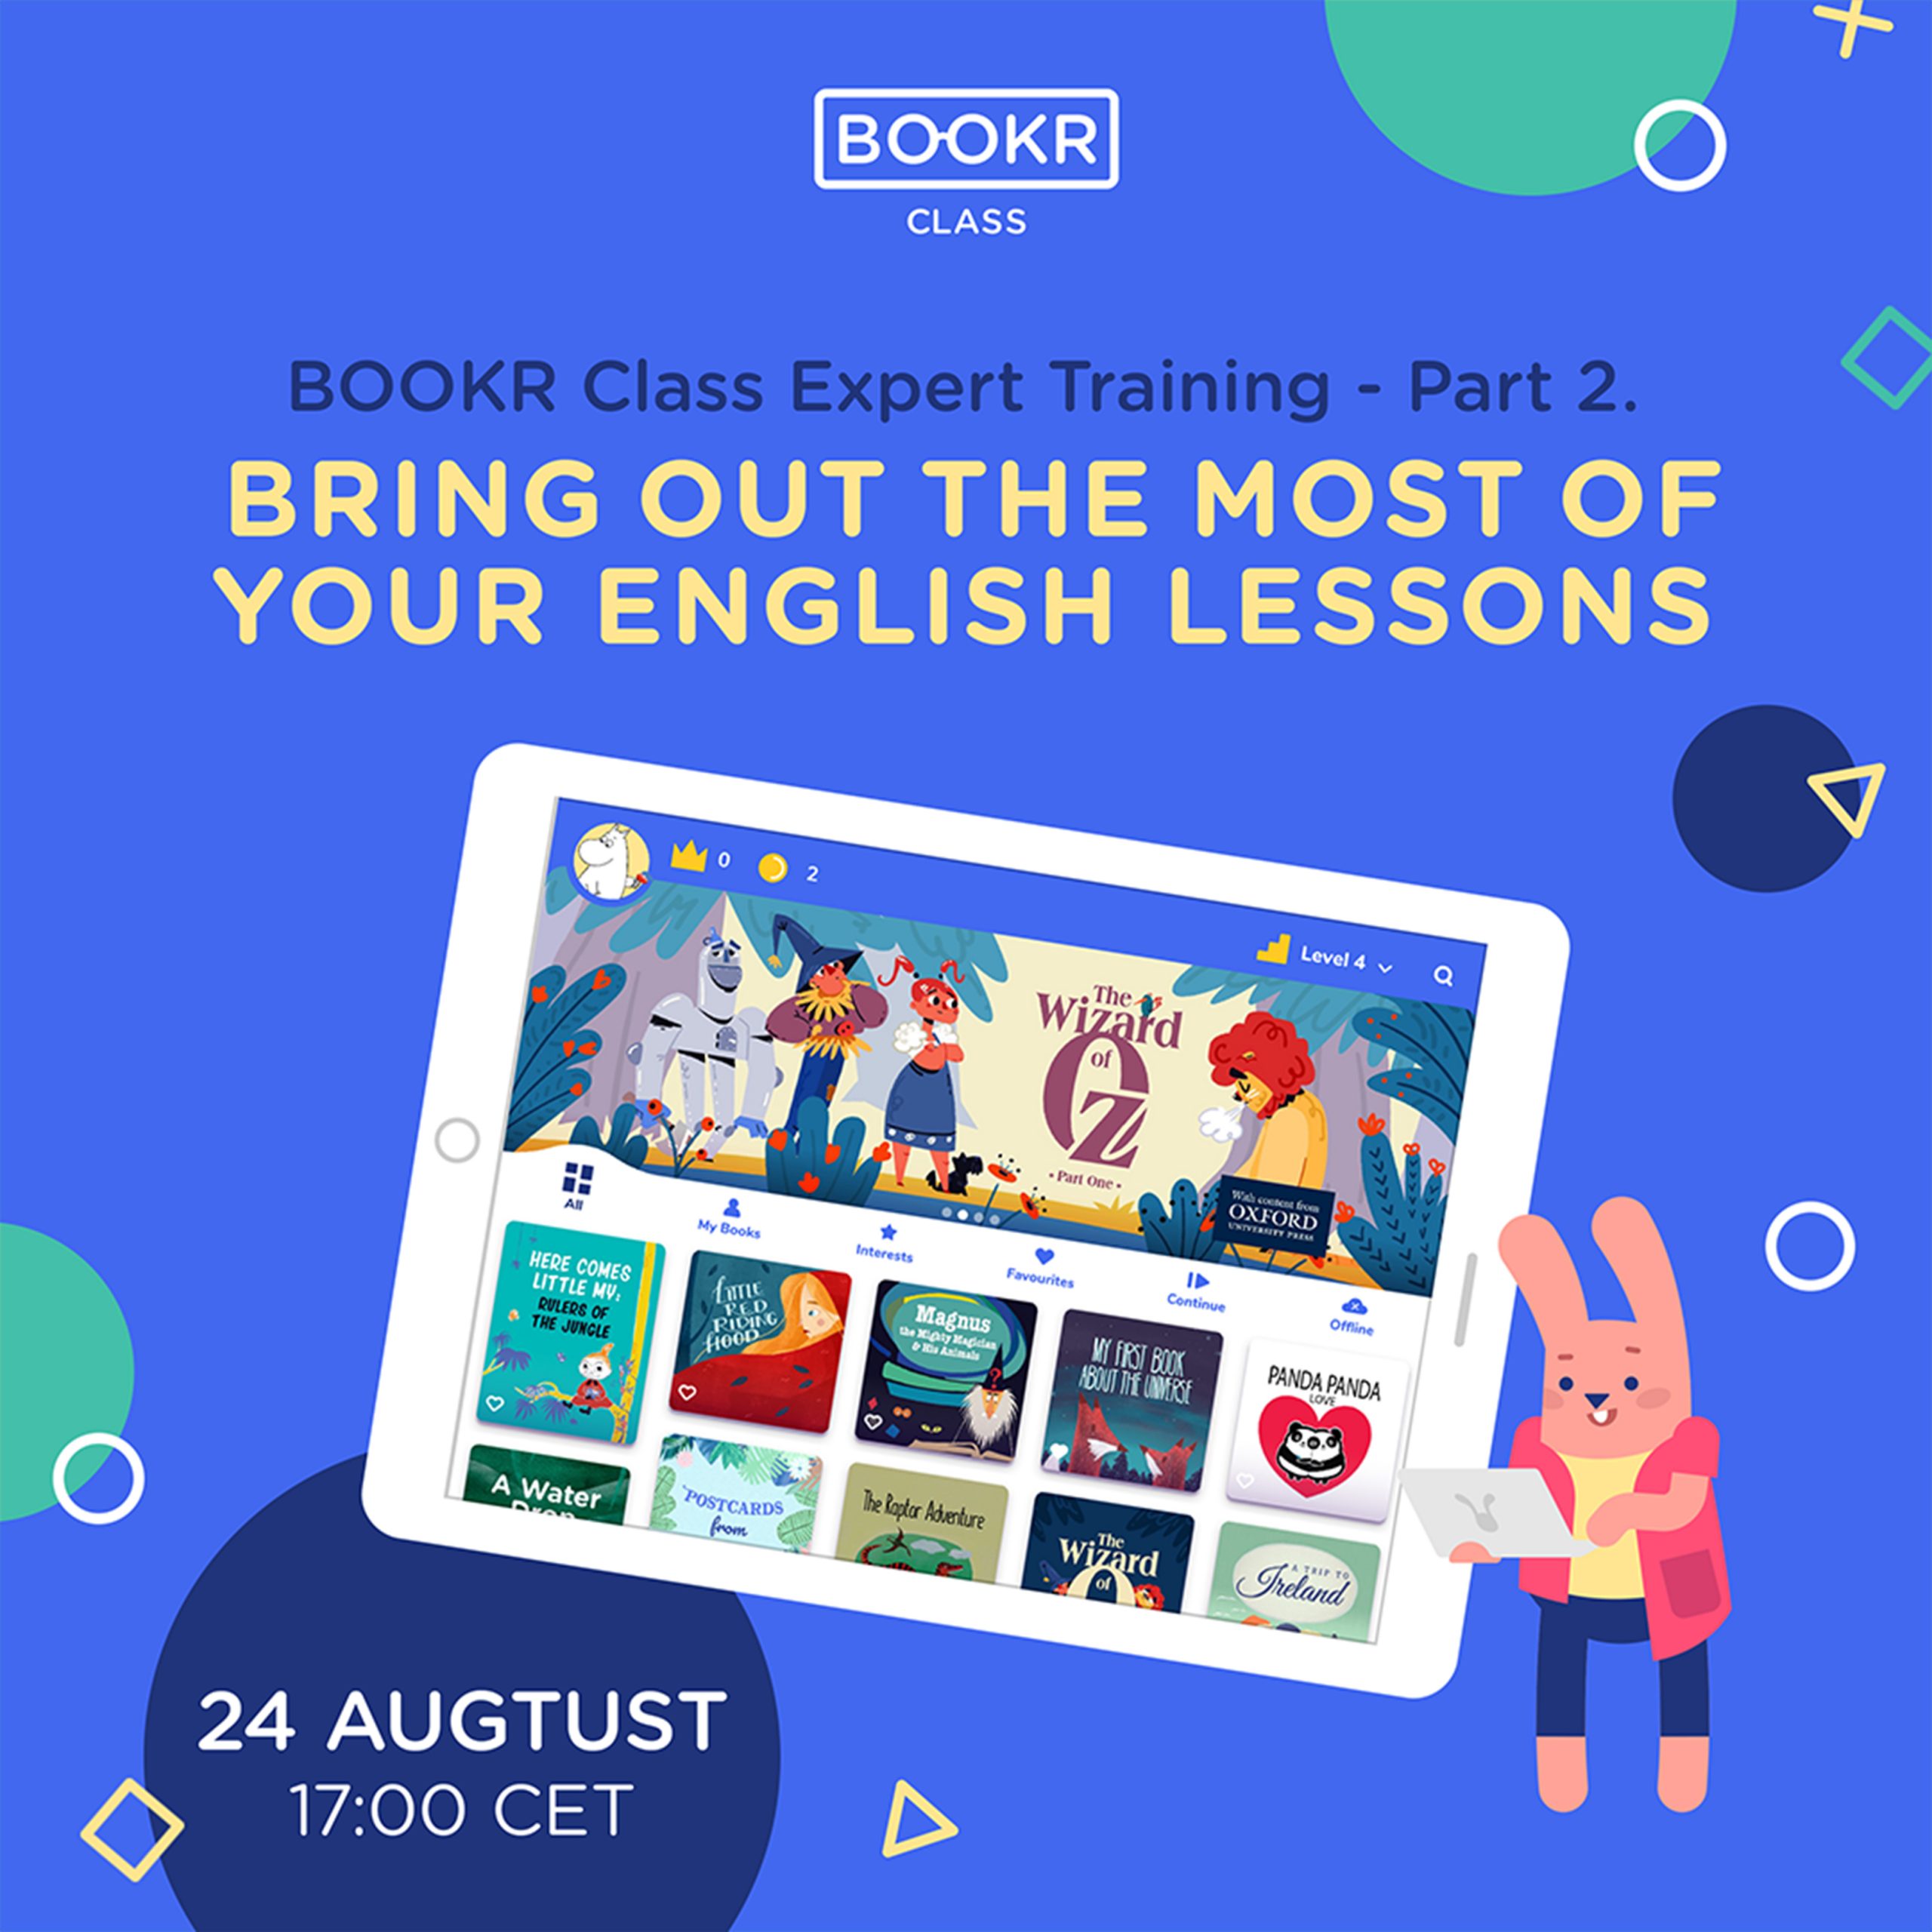 Bring out the most of your English lessons